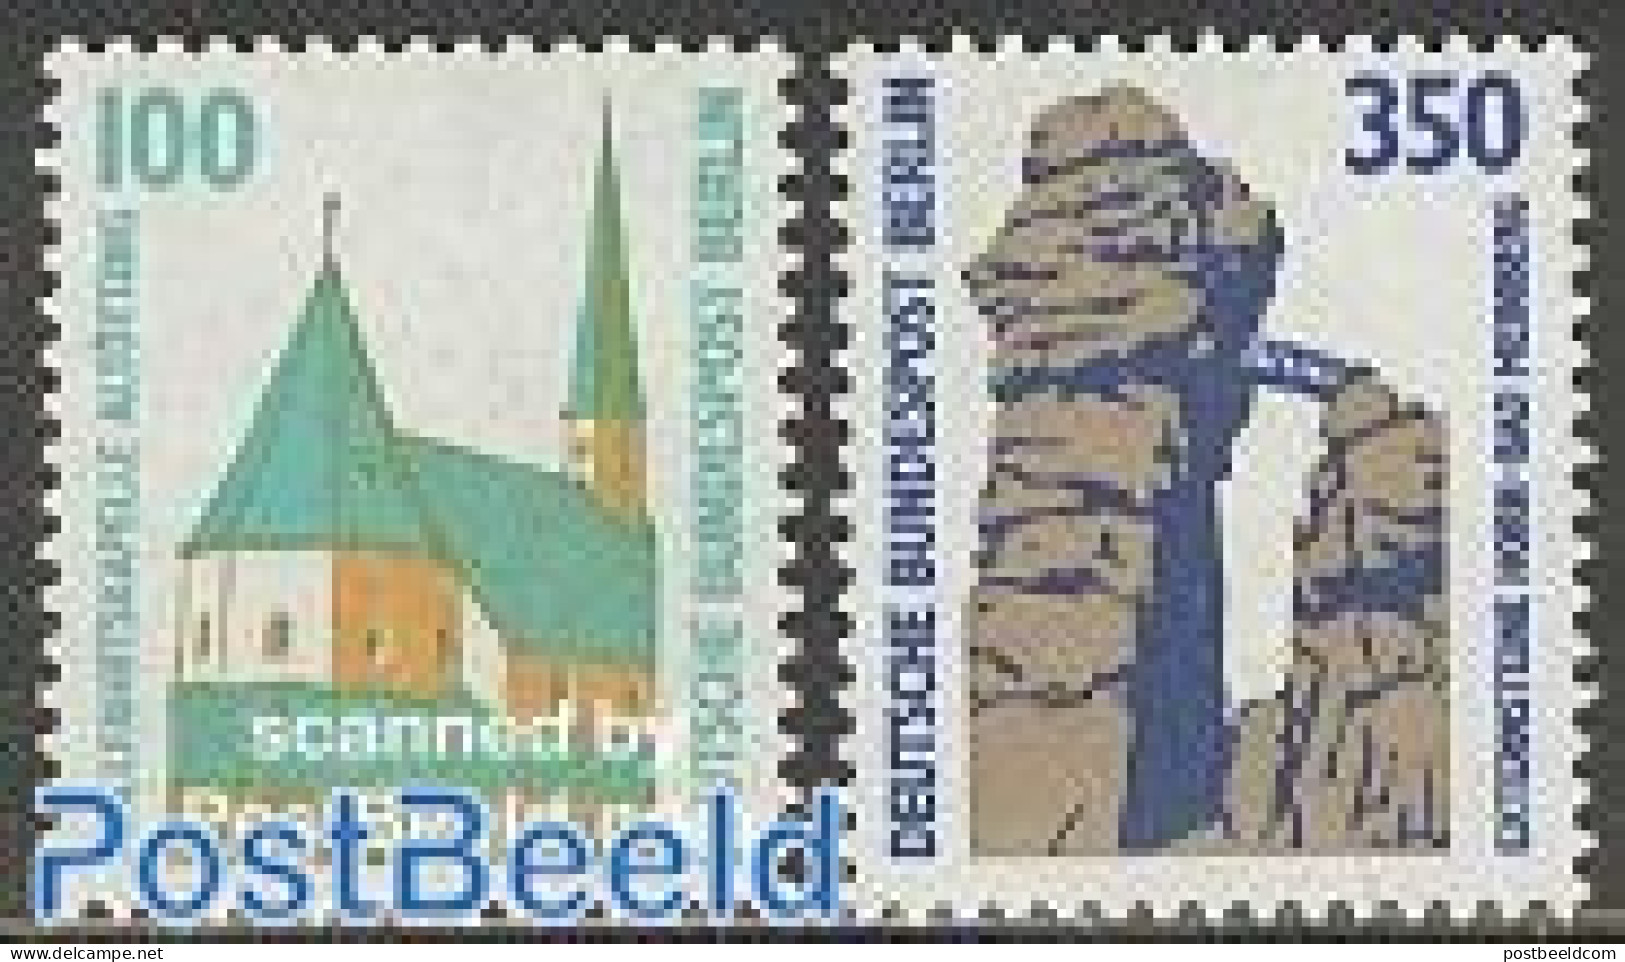 Germany, Berlin 1989 Definitives 2v, Mint NH, History - Religion - Geology - Churches, Temples, Mosques, Synagogues - Unused Stamps